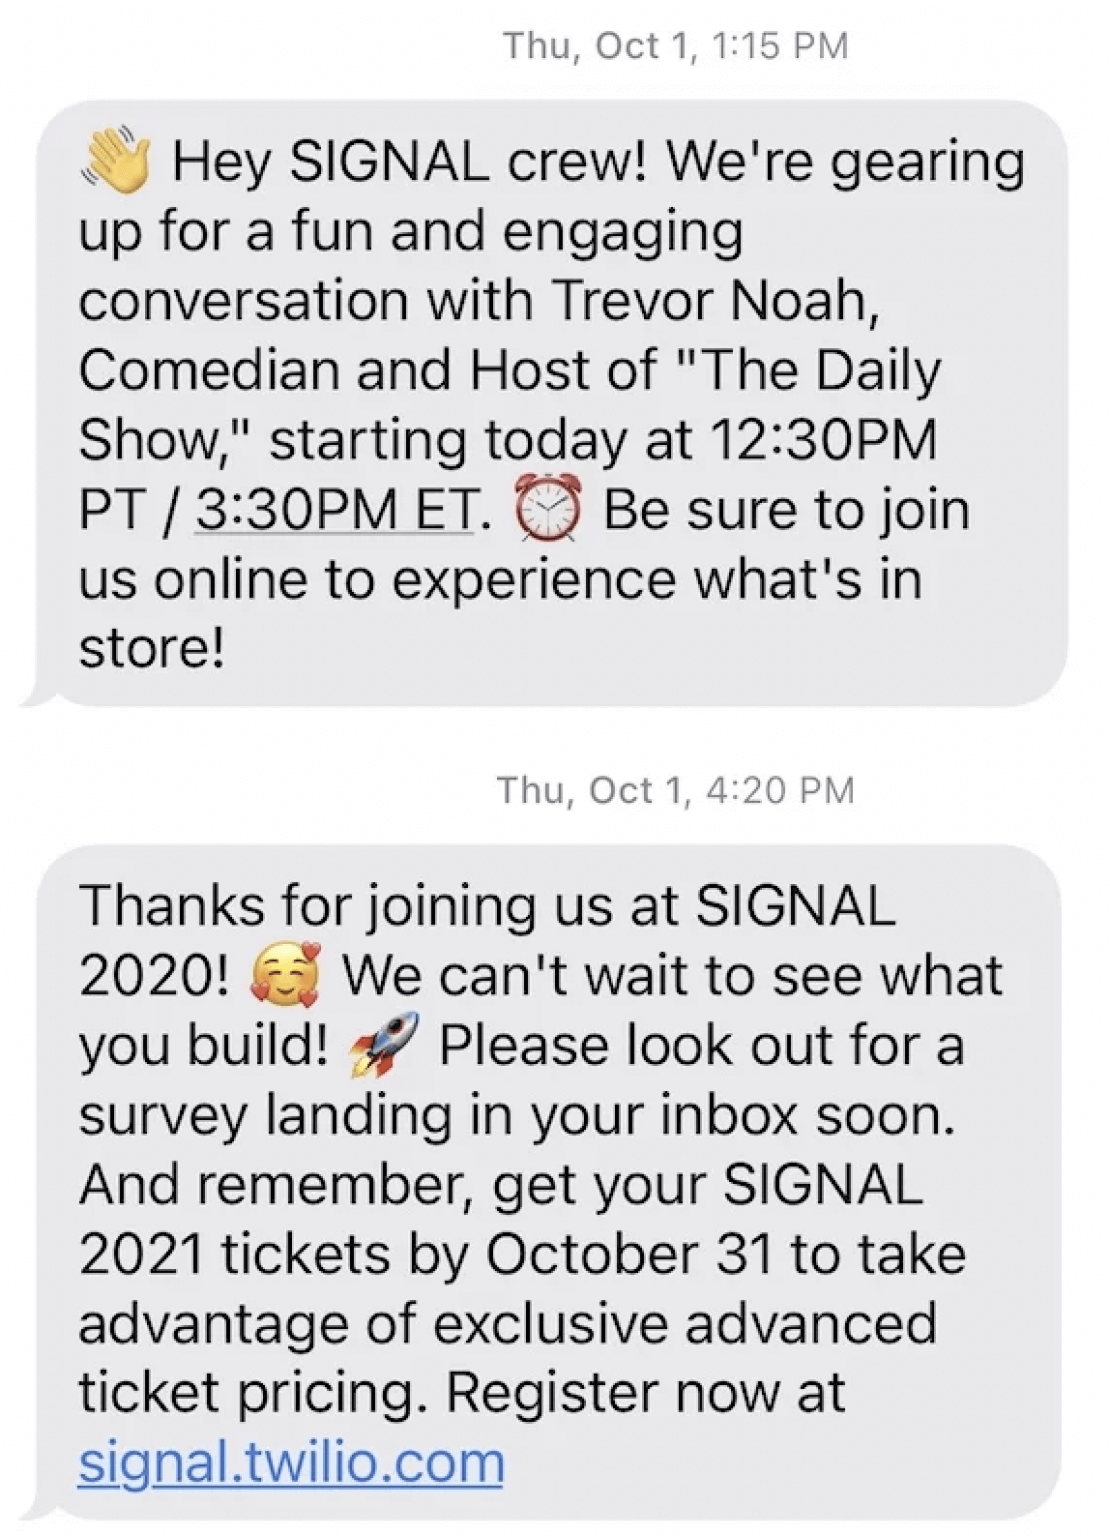 Screenshot of a Twilio text that reads “Hey SIGNAL crew! We’re gearing up for a fun and engaging conversation with Trevor Noah, Comedian and Host of The Daily Show, starting today at 12:30PM PT / 3:30PM ET. Be sure to join us online to experience what’s in store!”